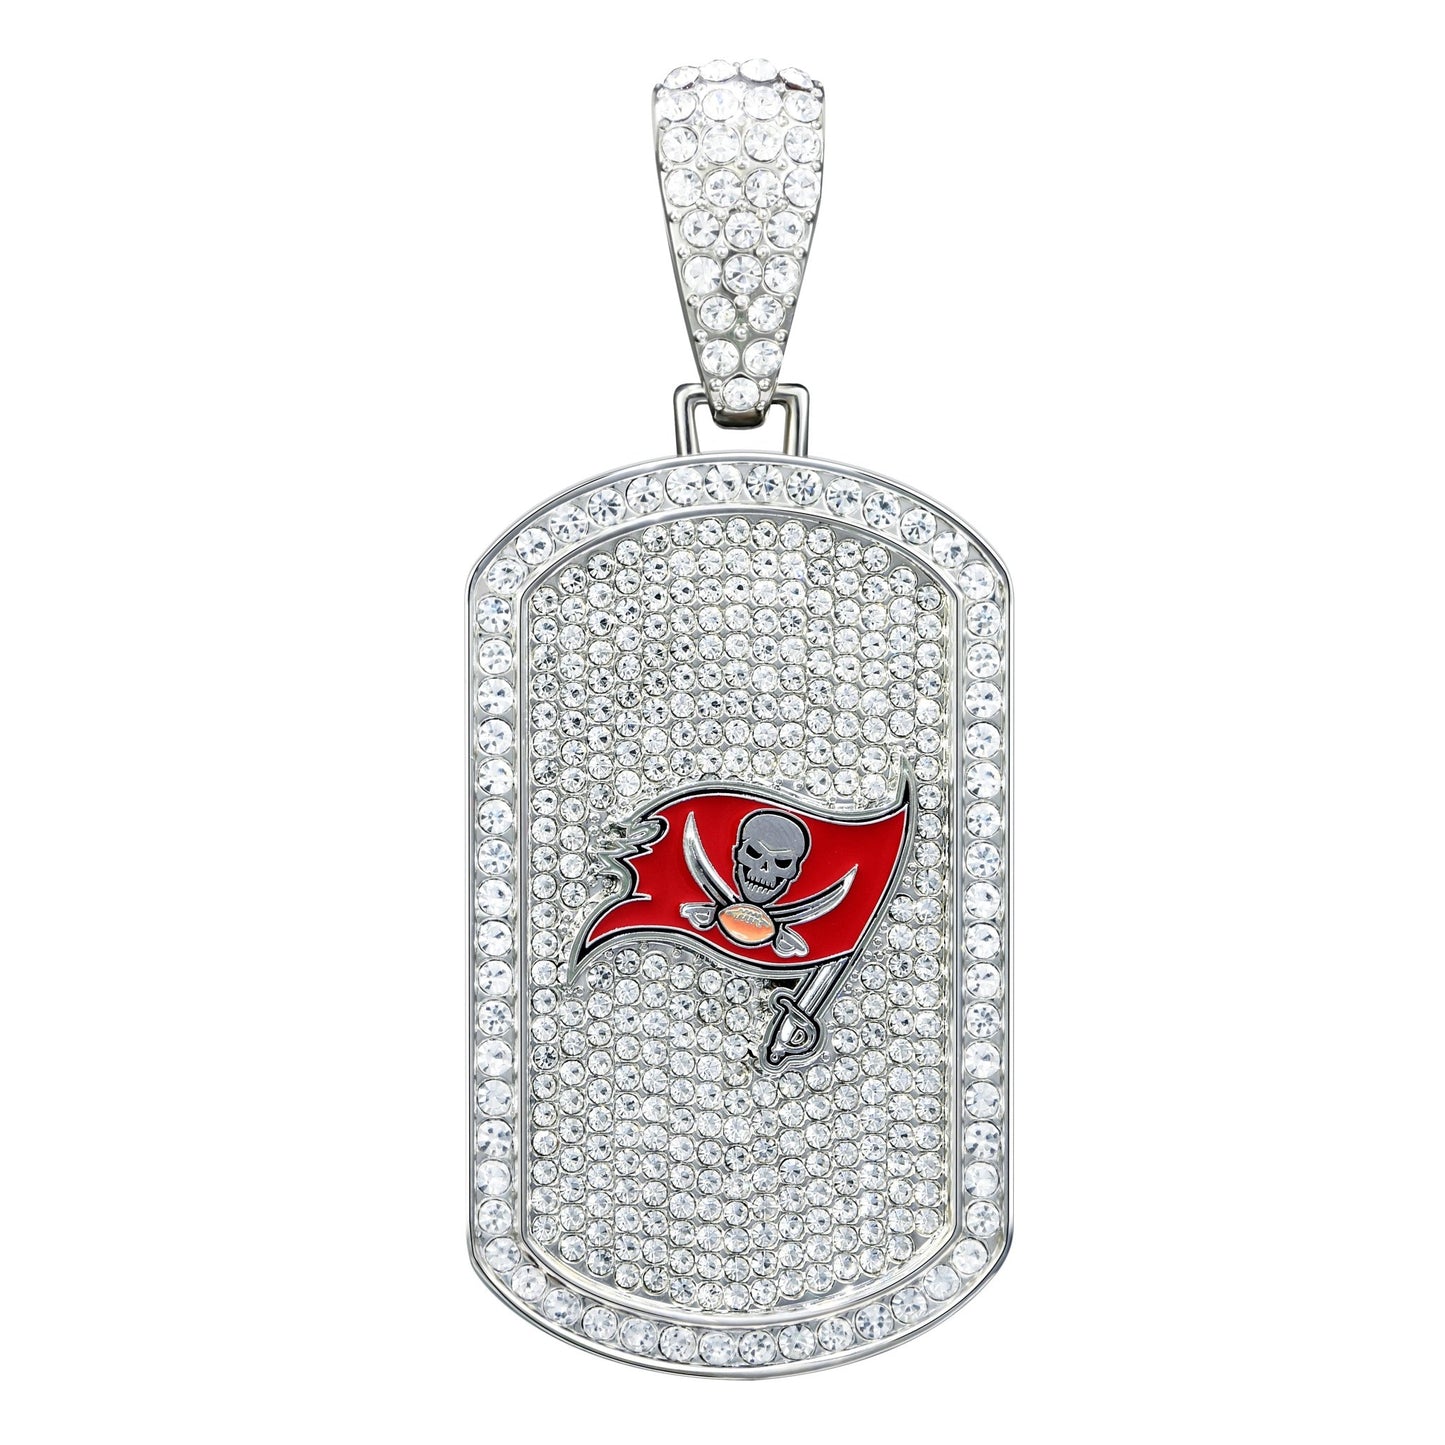 NFL Bling Dog Tag Necklace - Gamedays Gear - Tampa Bay Buccaneers